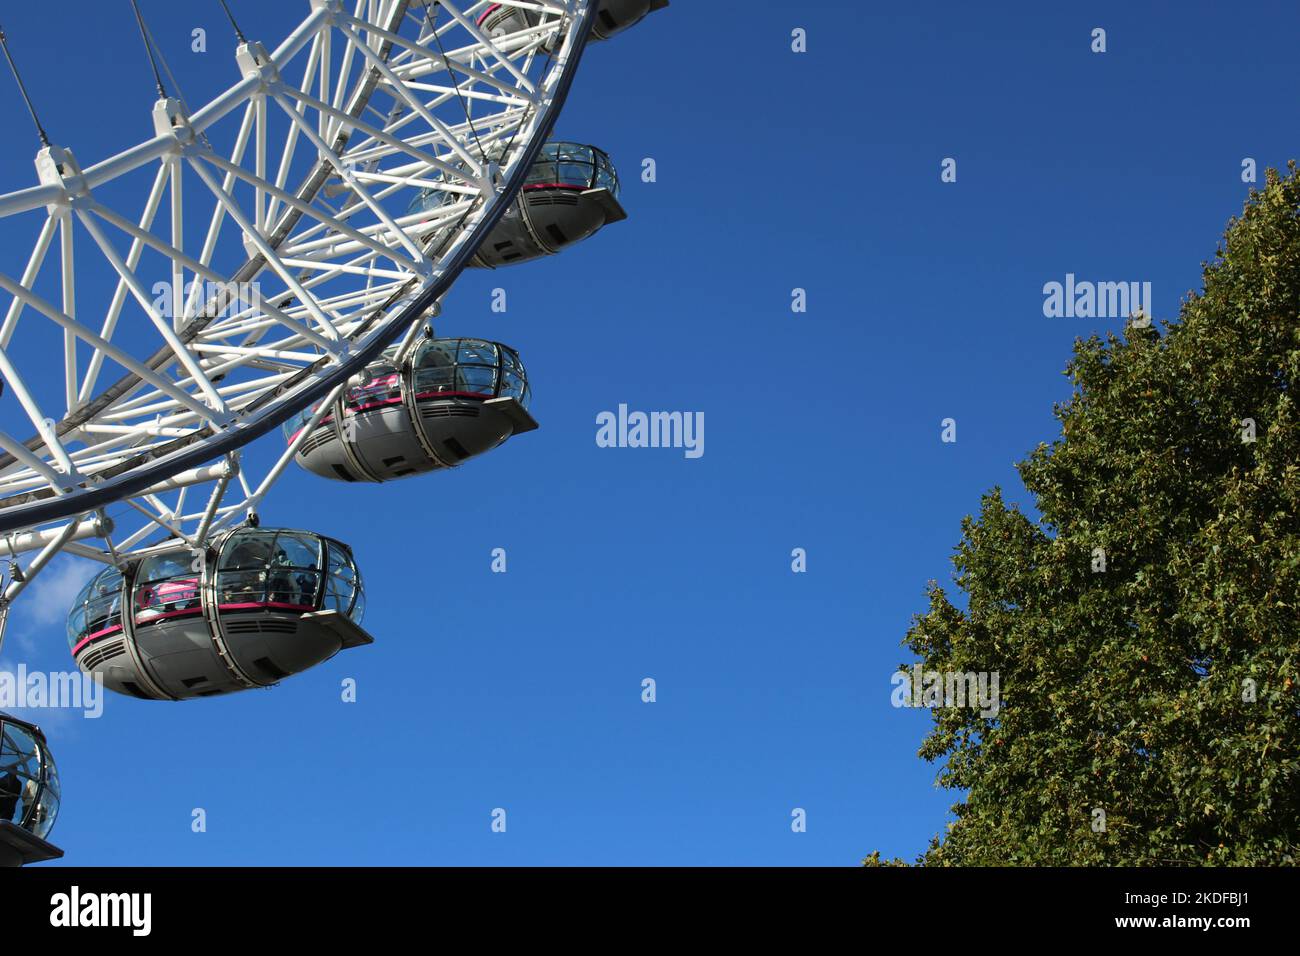 Tourists enjoy the Millennium Wheel on a sunny day. Close up picture of the carriages on the London Eye with greenery and blue sky background. Stock Photo